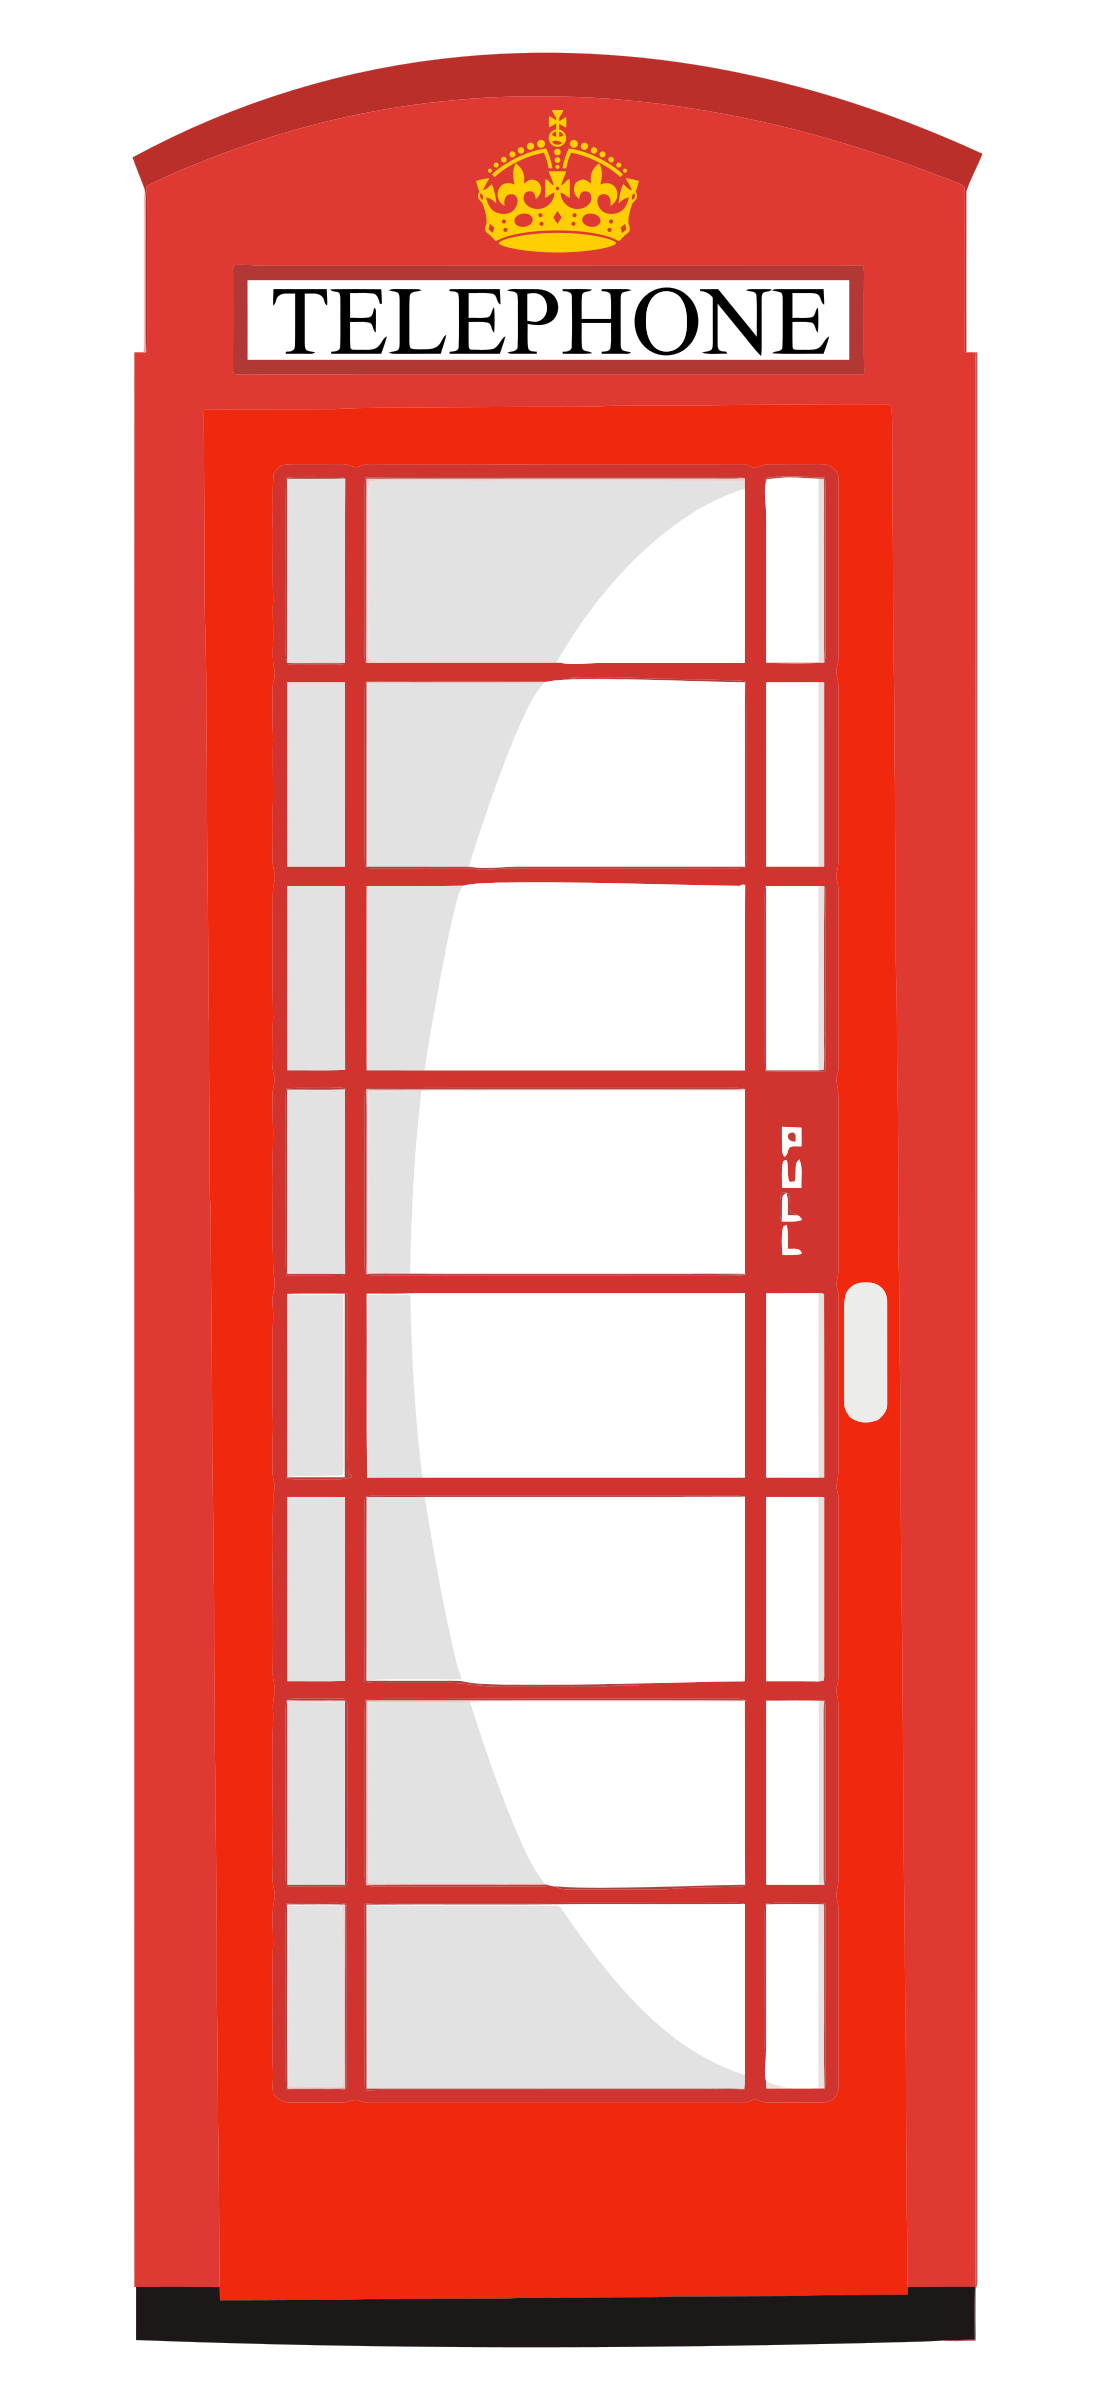 Red telephone box big. English clipart phone booth